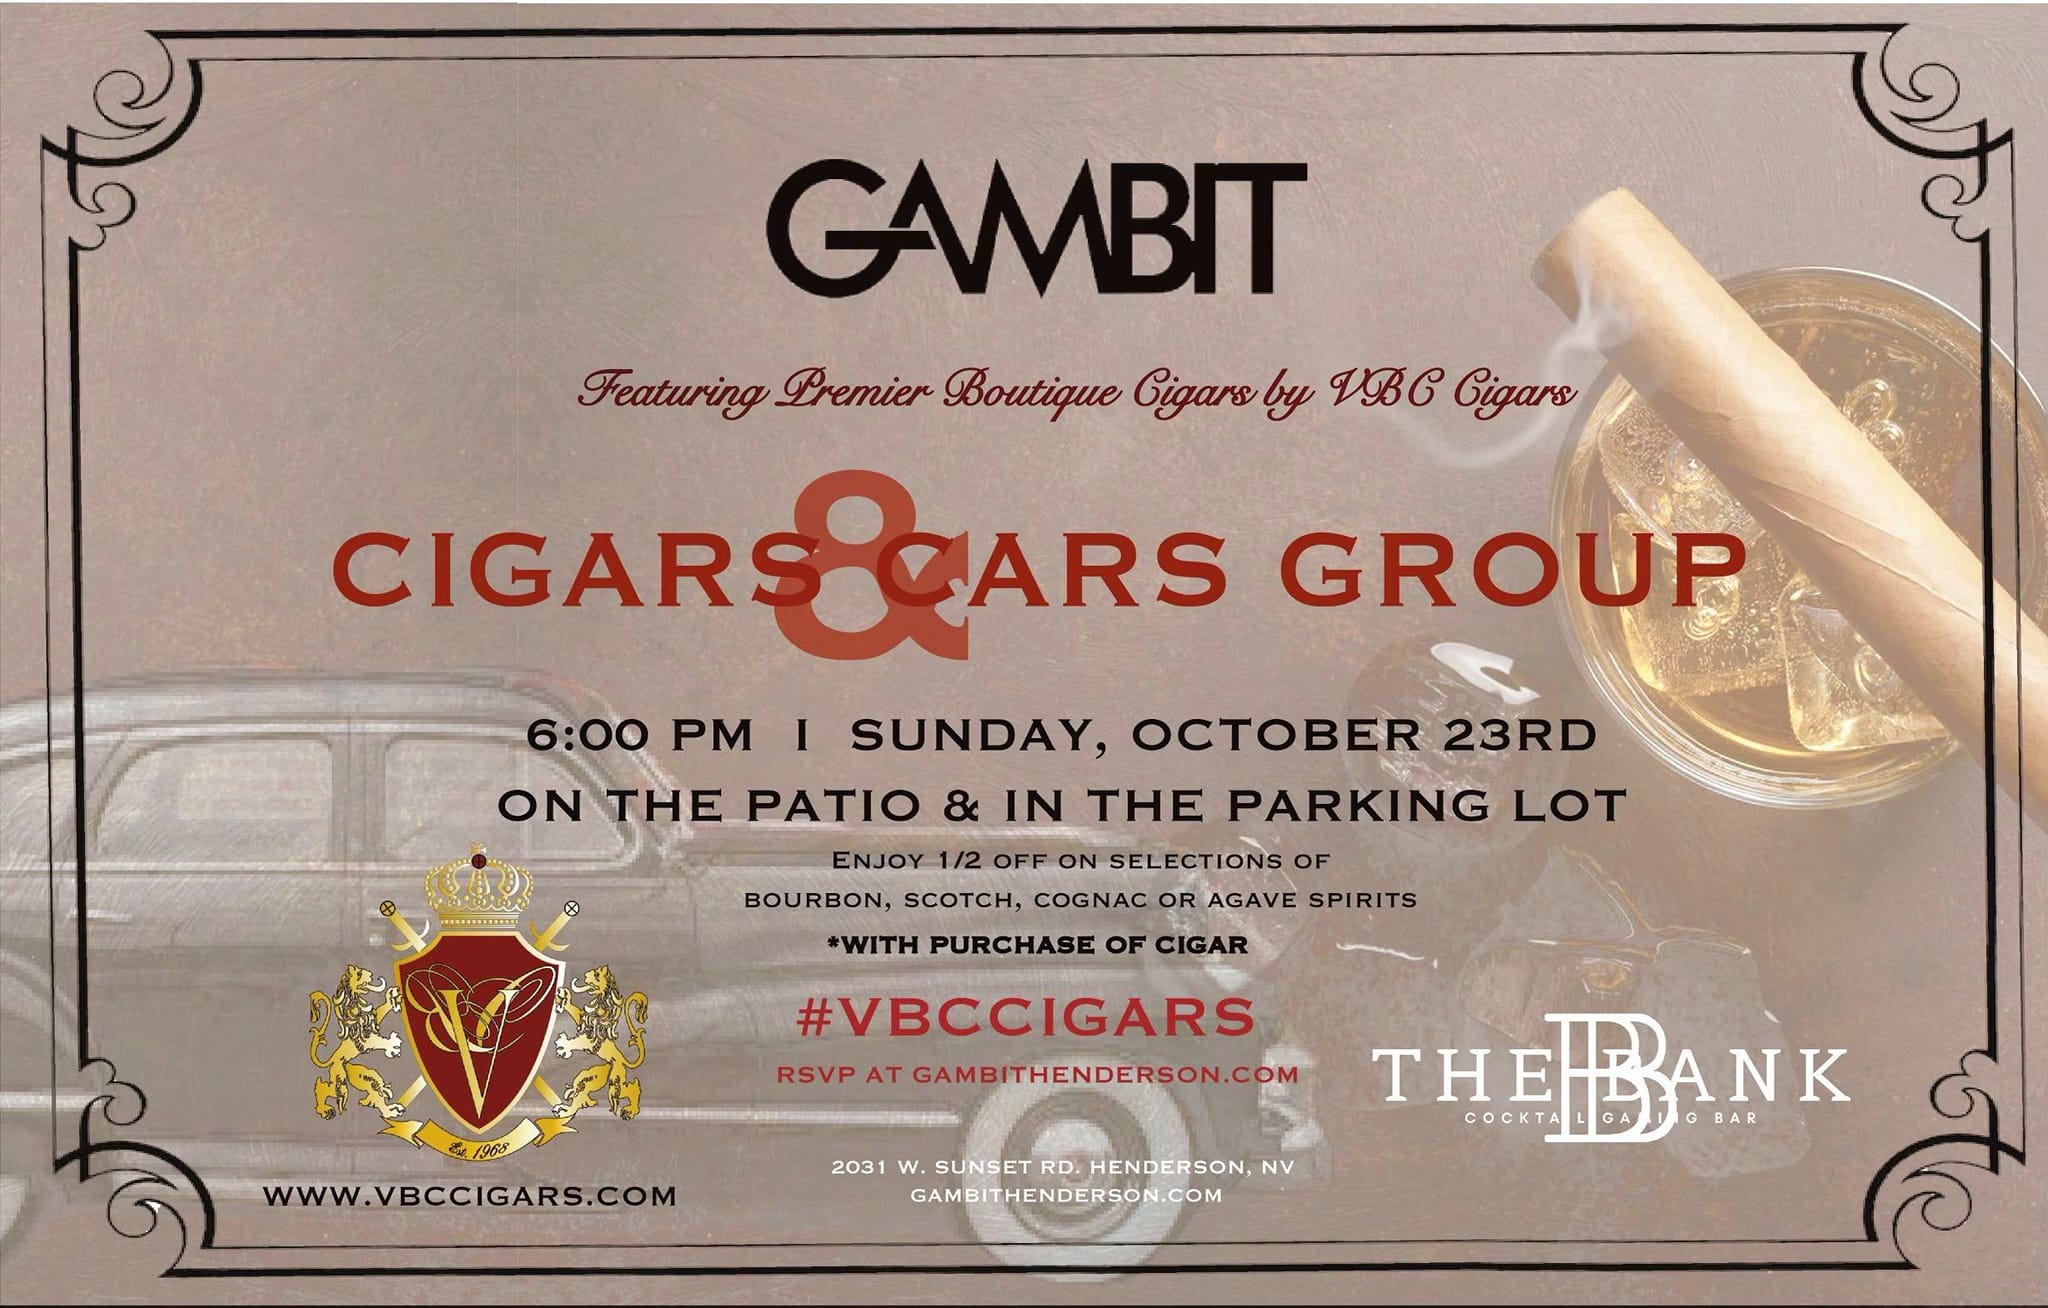 Cigars and Cars Group Event